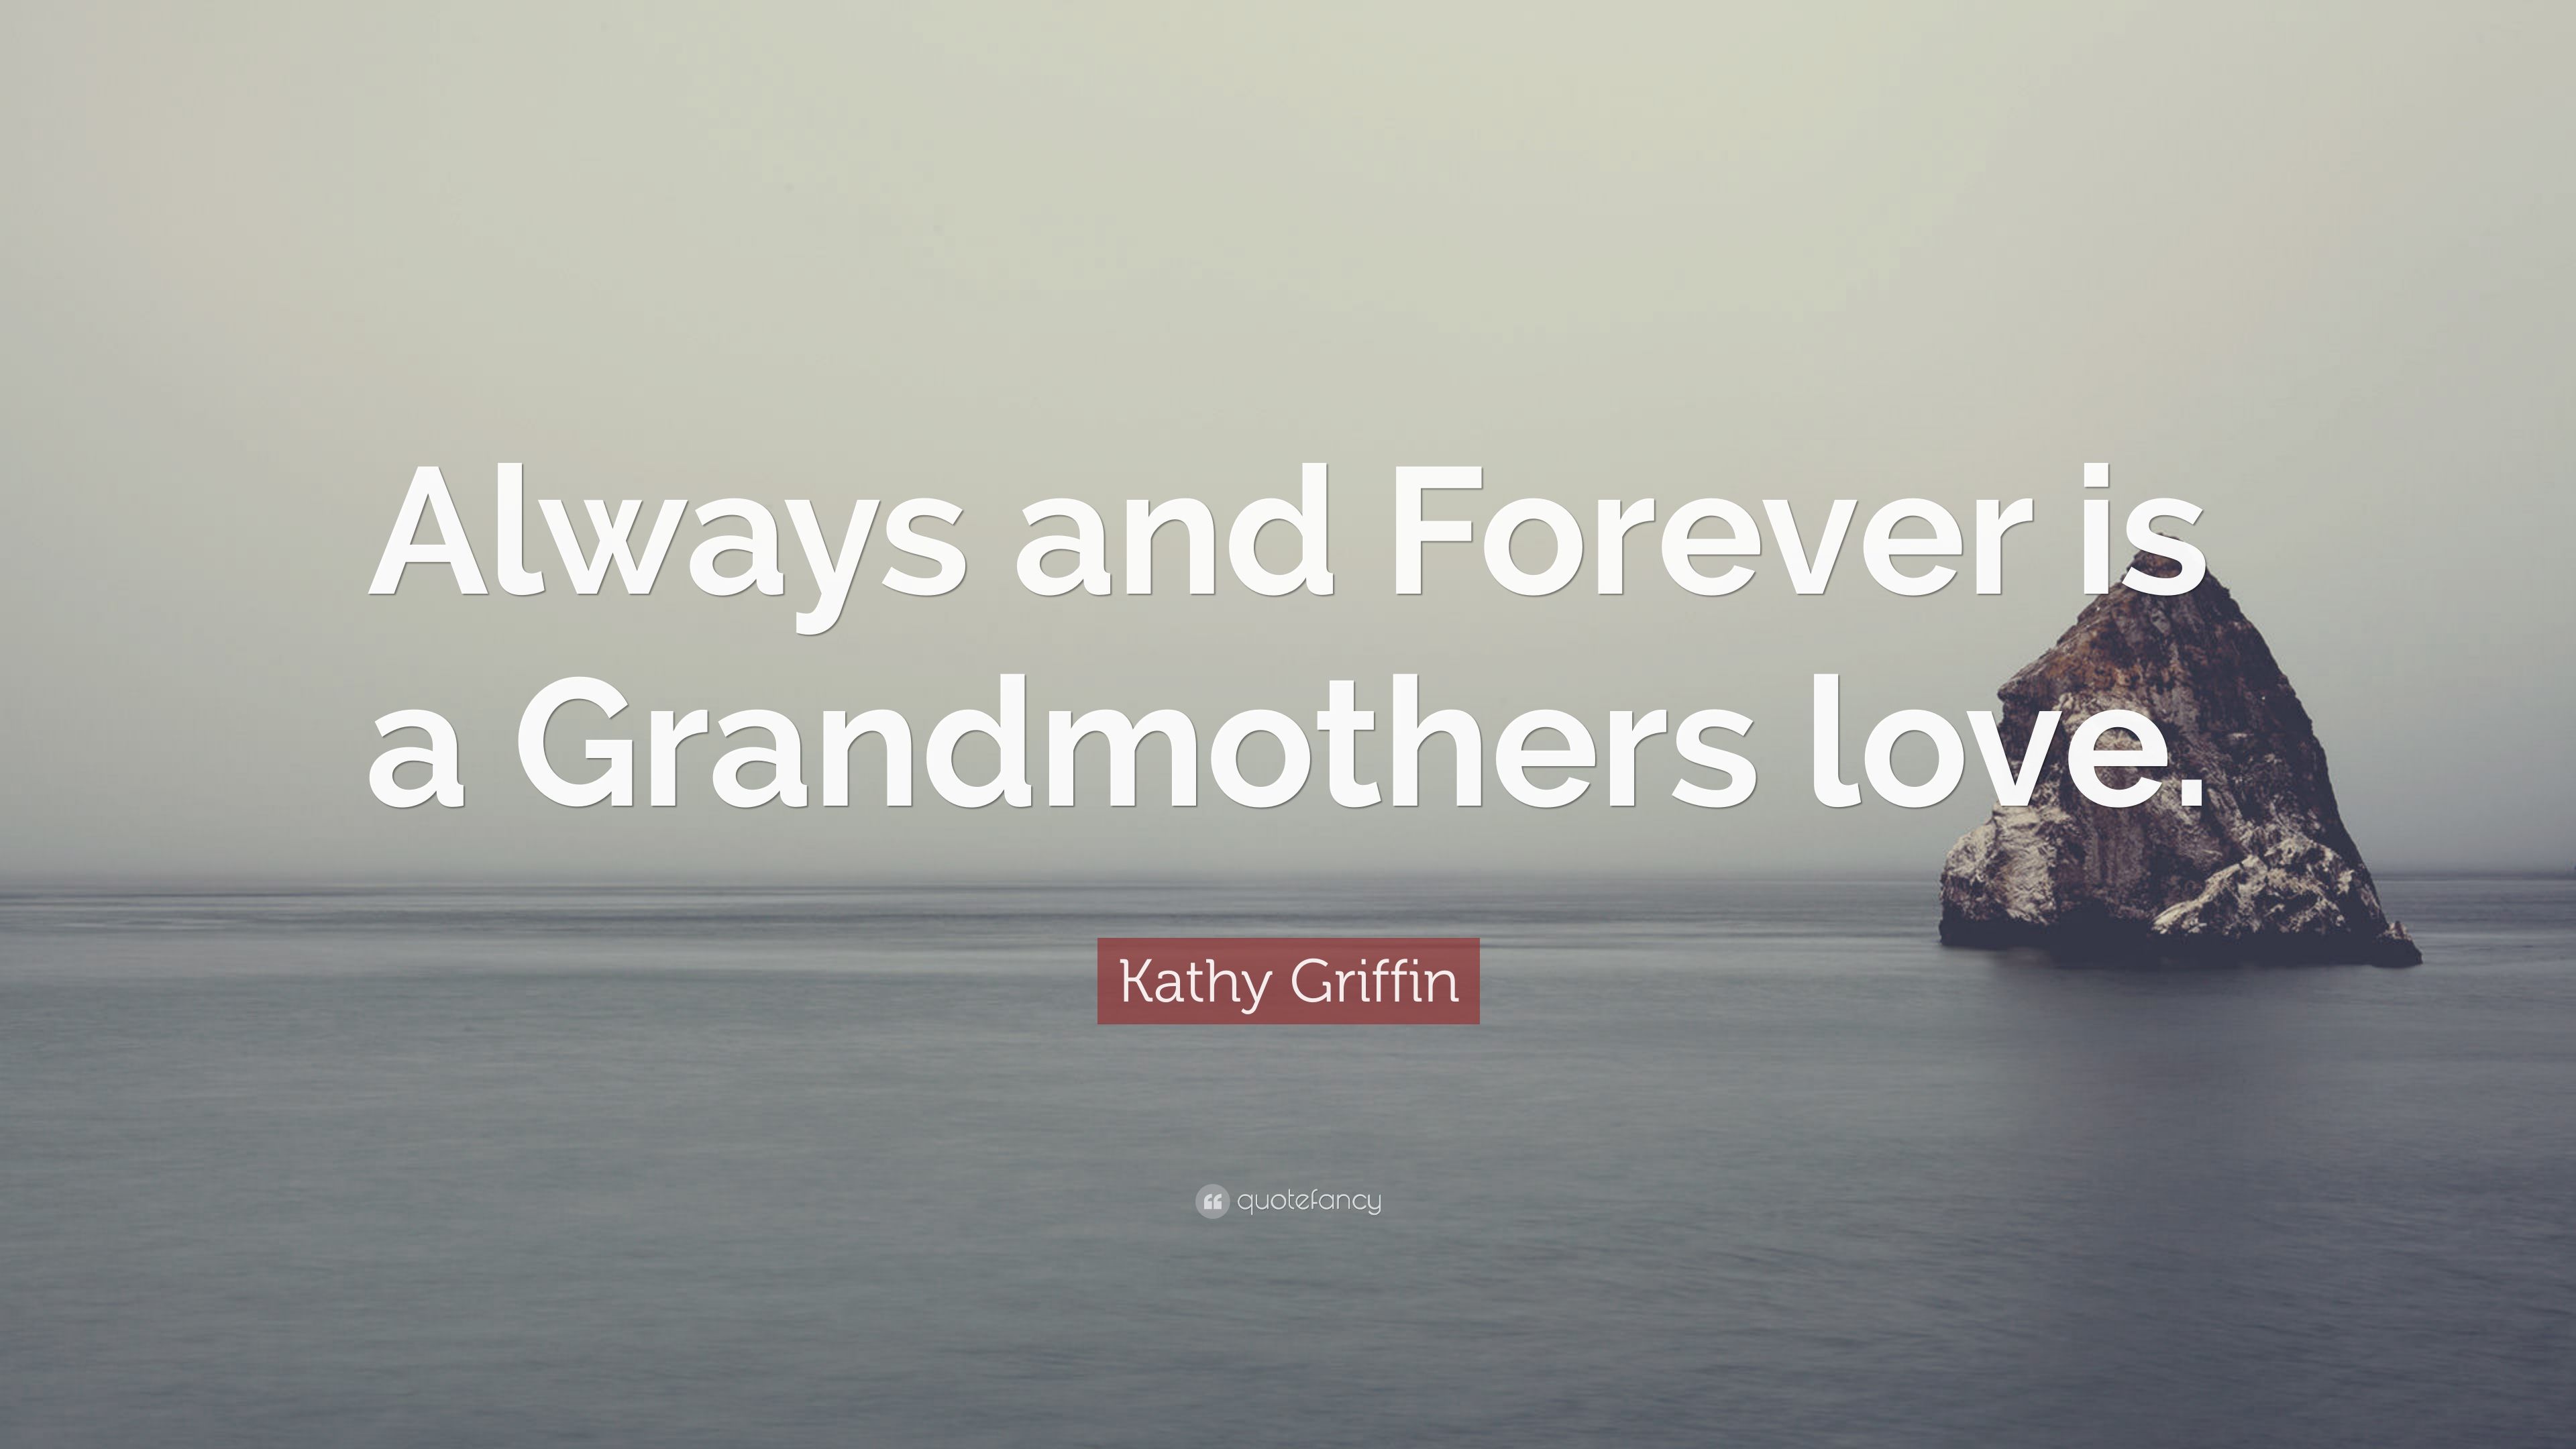 Kathy Griffin Quote: "Always and Forever is a Grandmothers love.